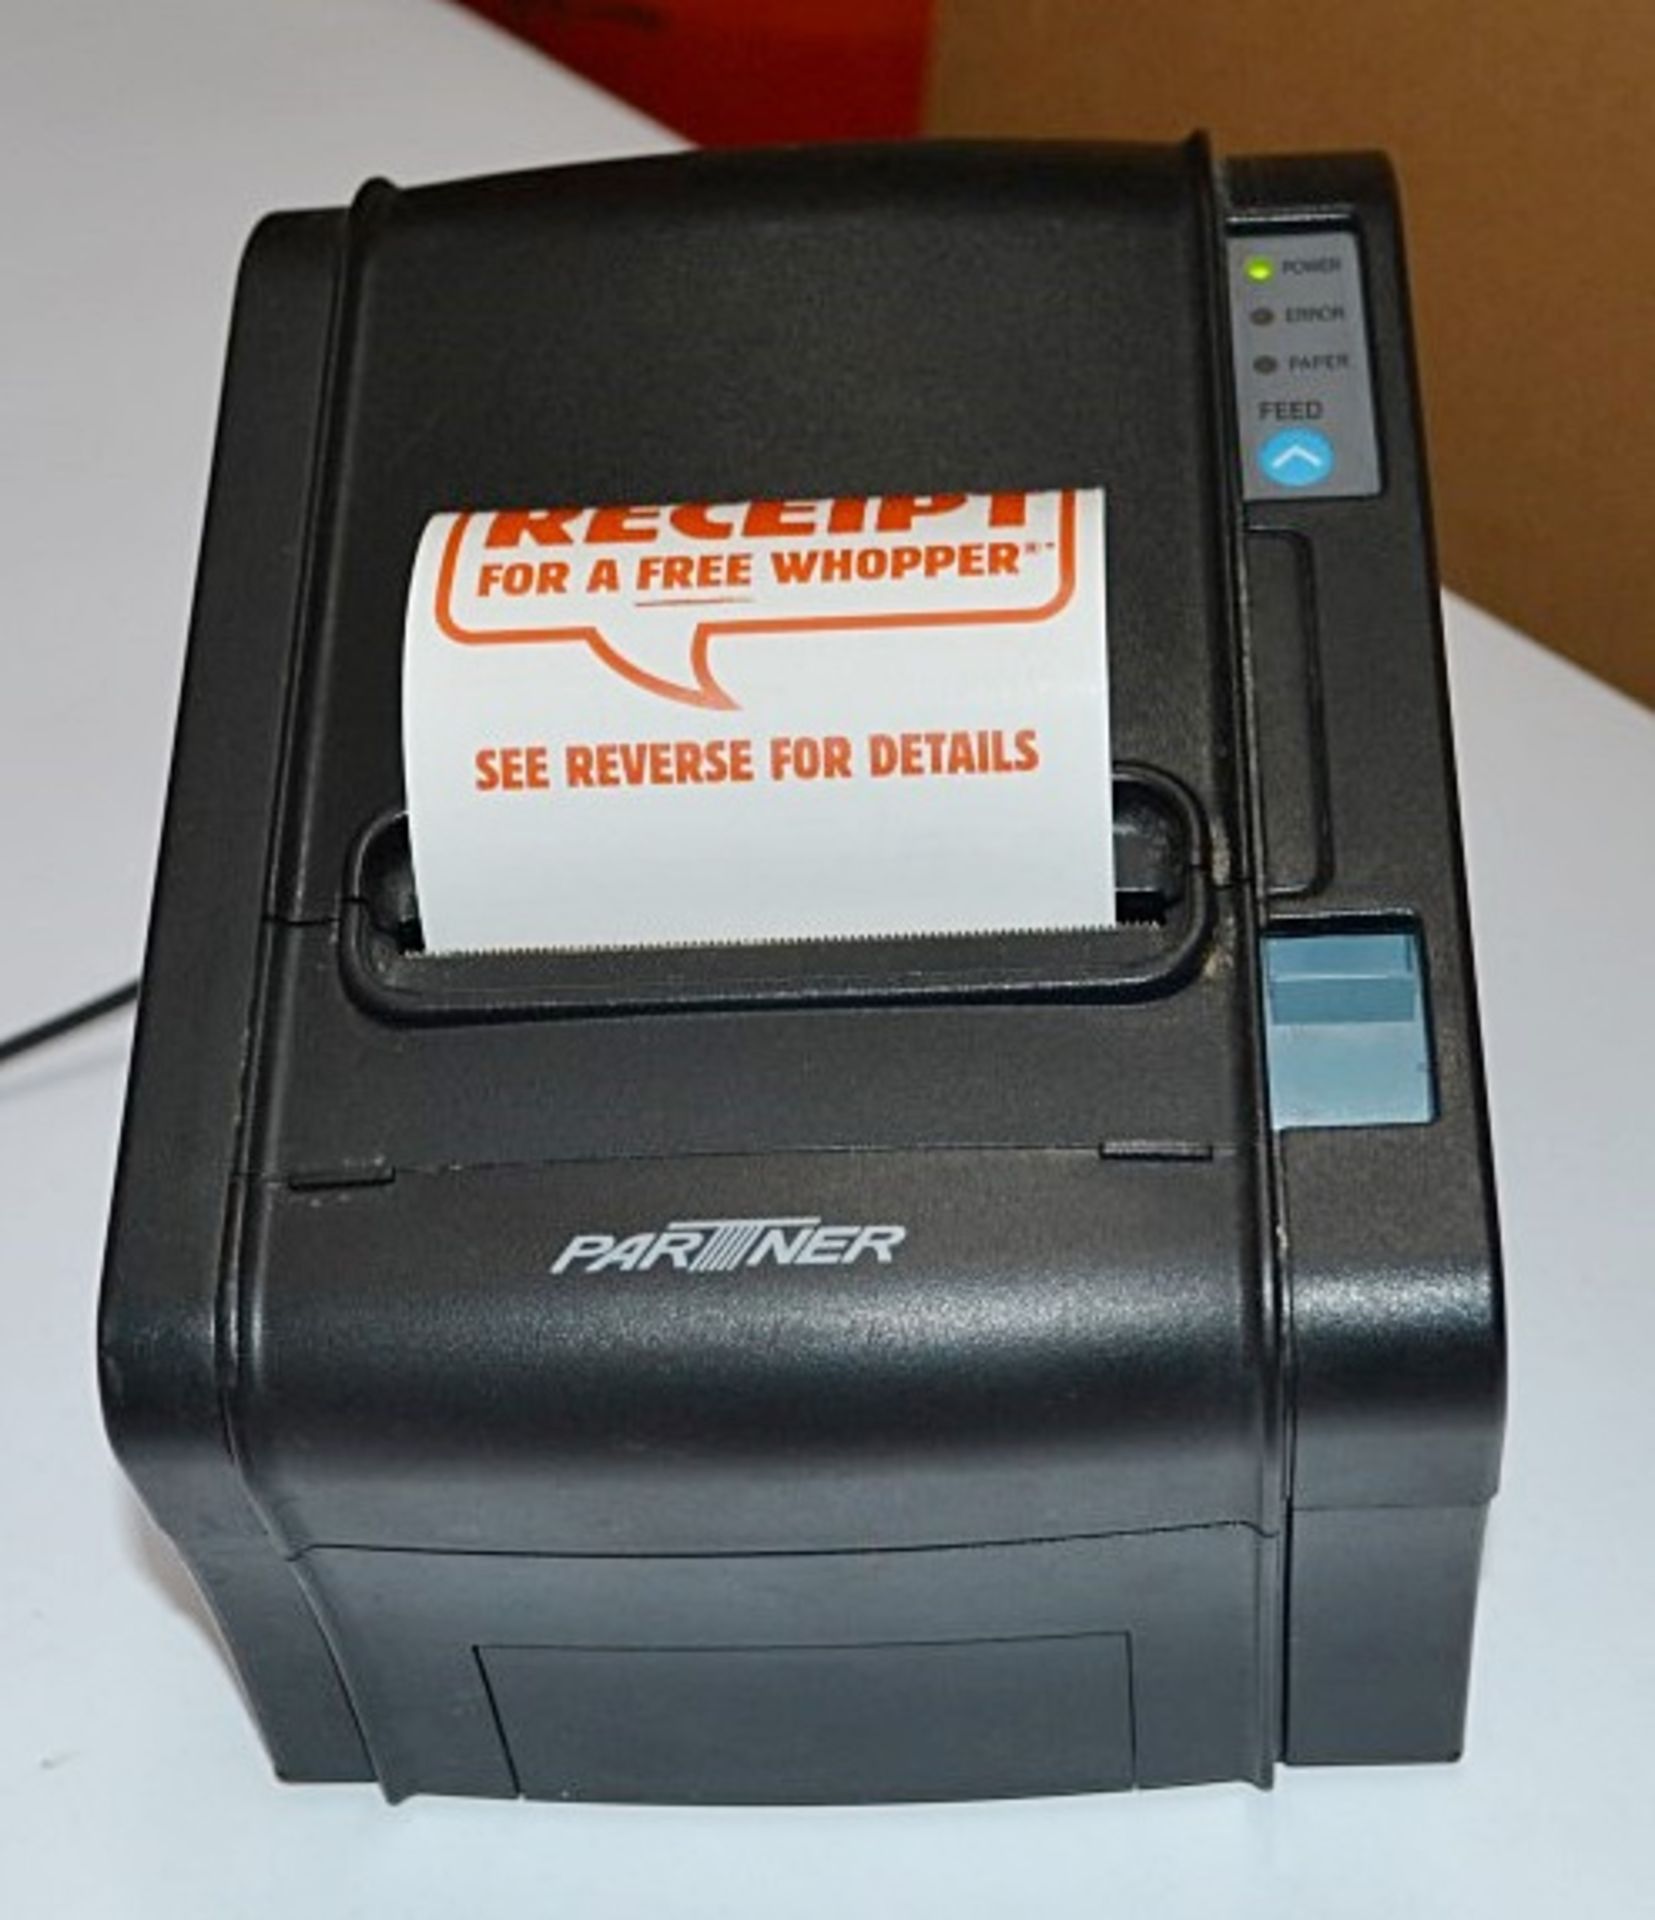 1 x Partner Tech RP-320 Thermal Receipt Printer - Removed From A Working Restaurant Enviroment - - Image 3 of 5